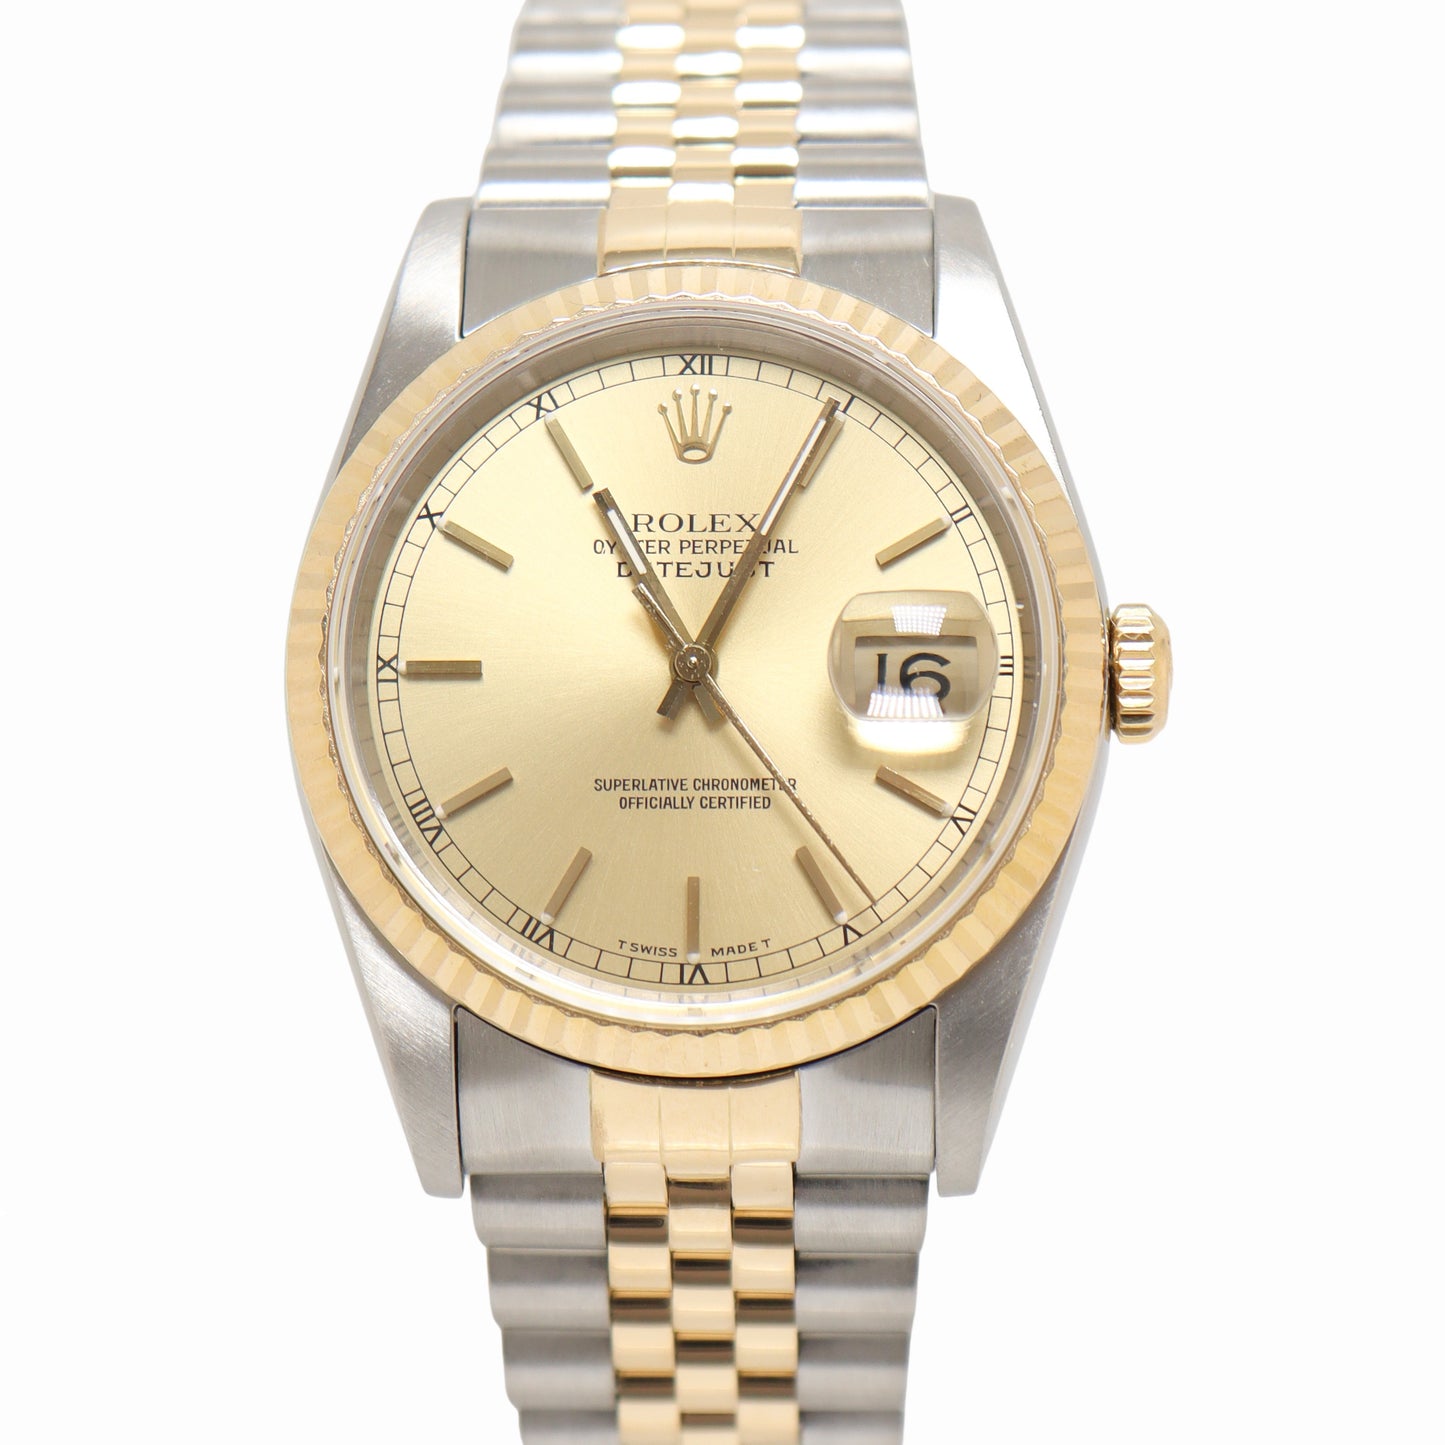 Rolex Datejust Two-Tone Stainless Steel & Yellow Gold 36mm Champagne Stick Dial Watch Reference #: 16233 - Happy Jewelers Fine Jewelry Lifetime Warranty